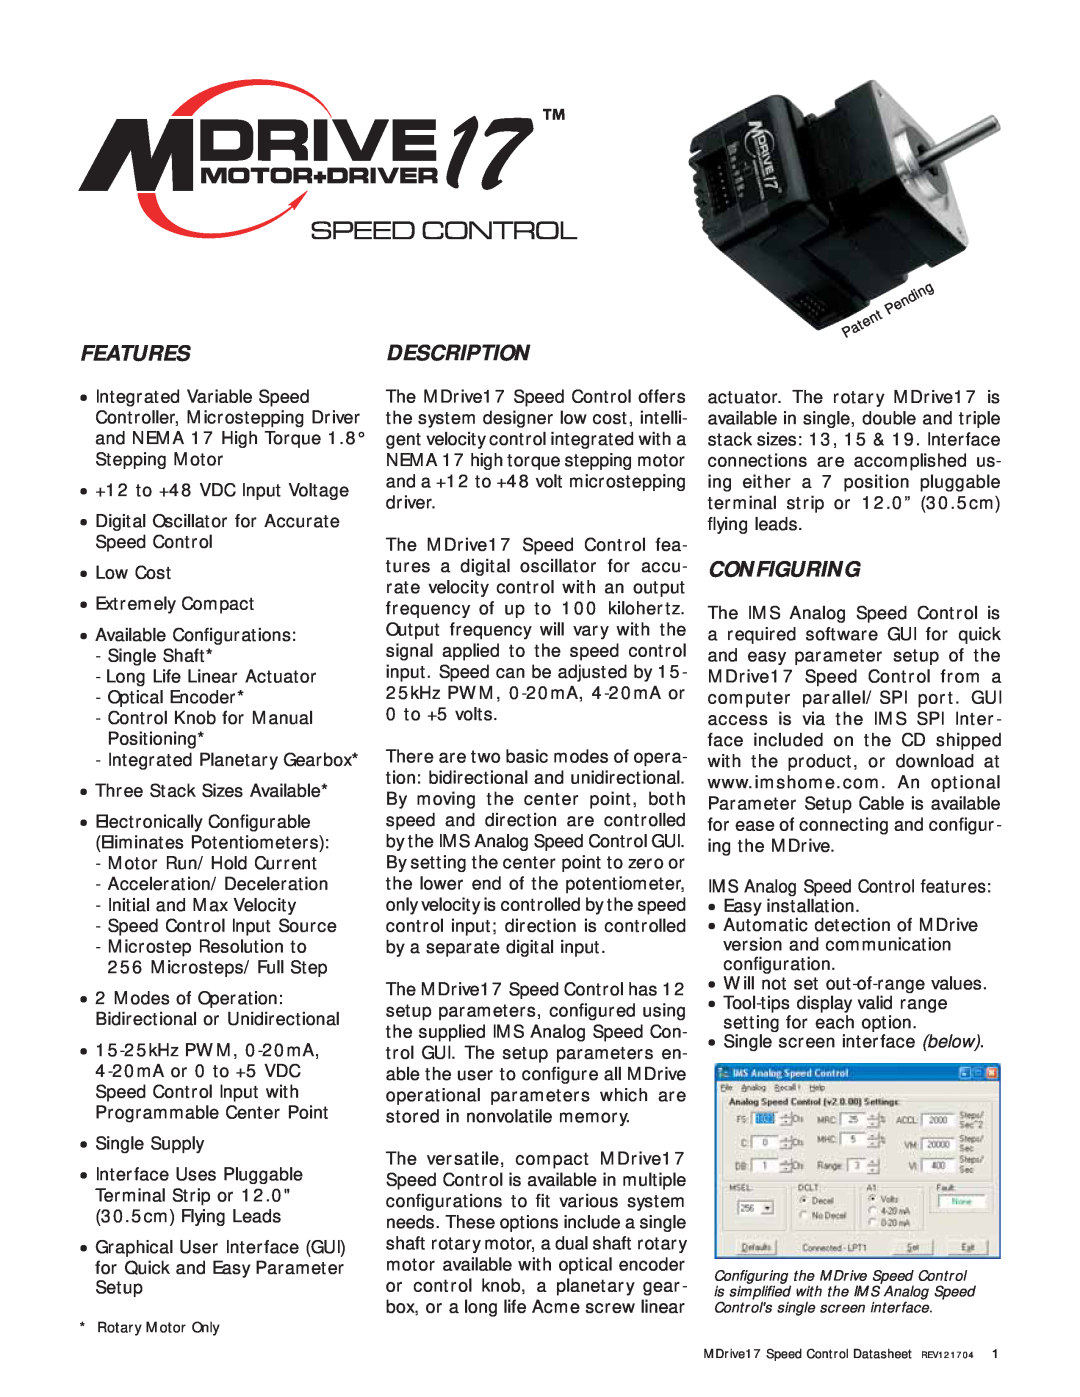 Intelligent Motion Systems MDO17 manual Featuresdescription, Configuring, Speed Control 